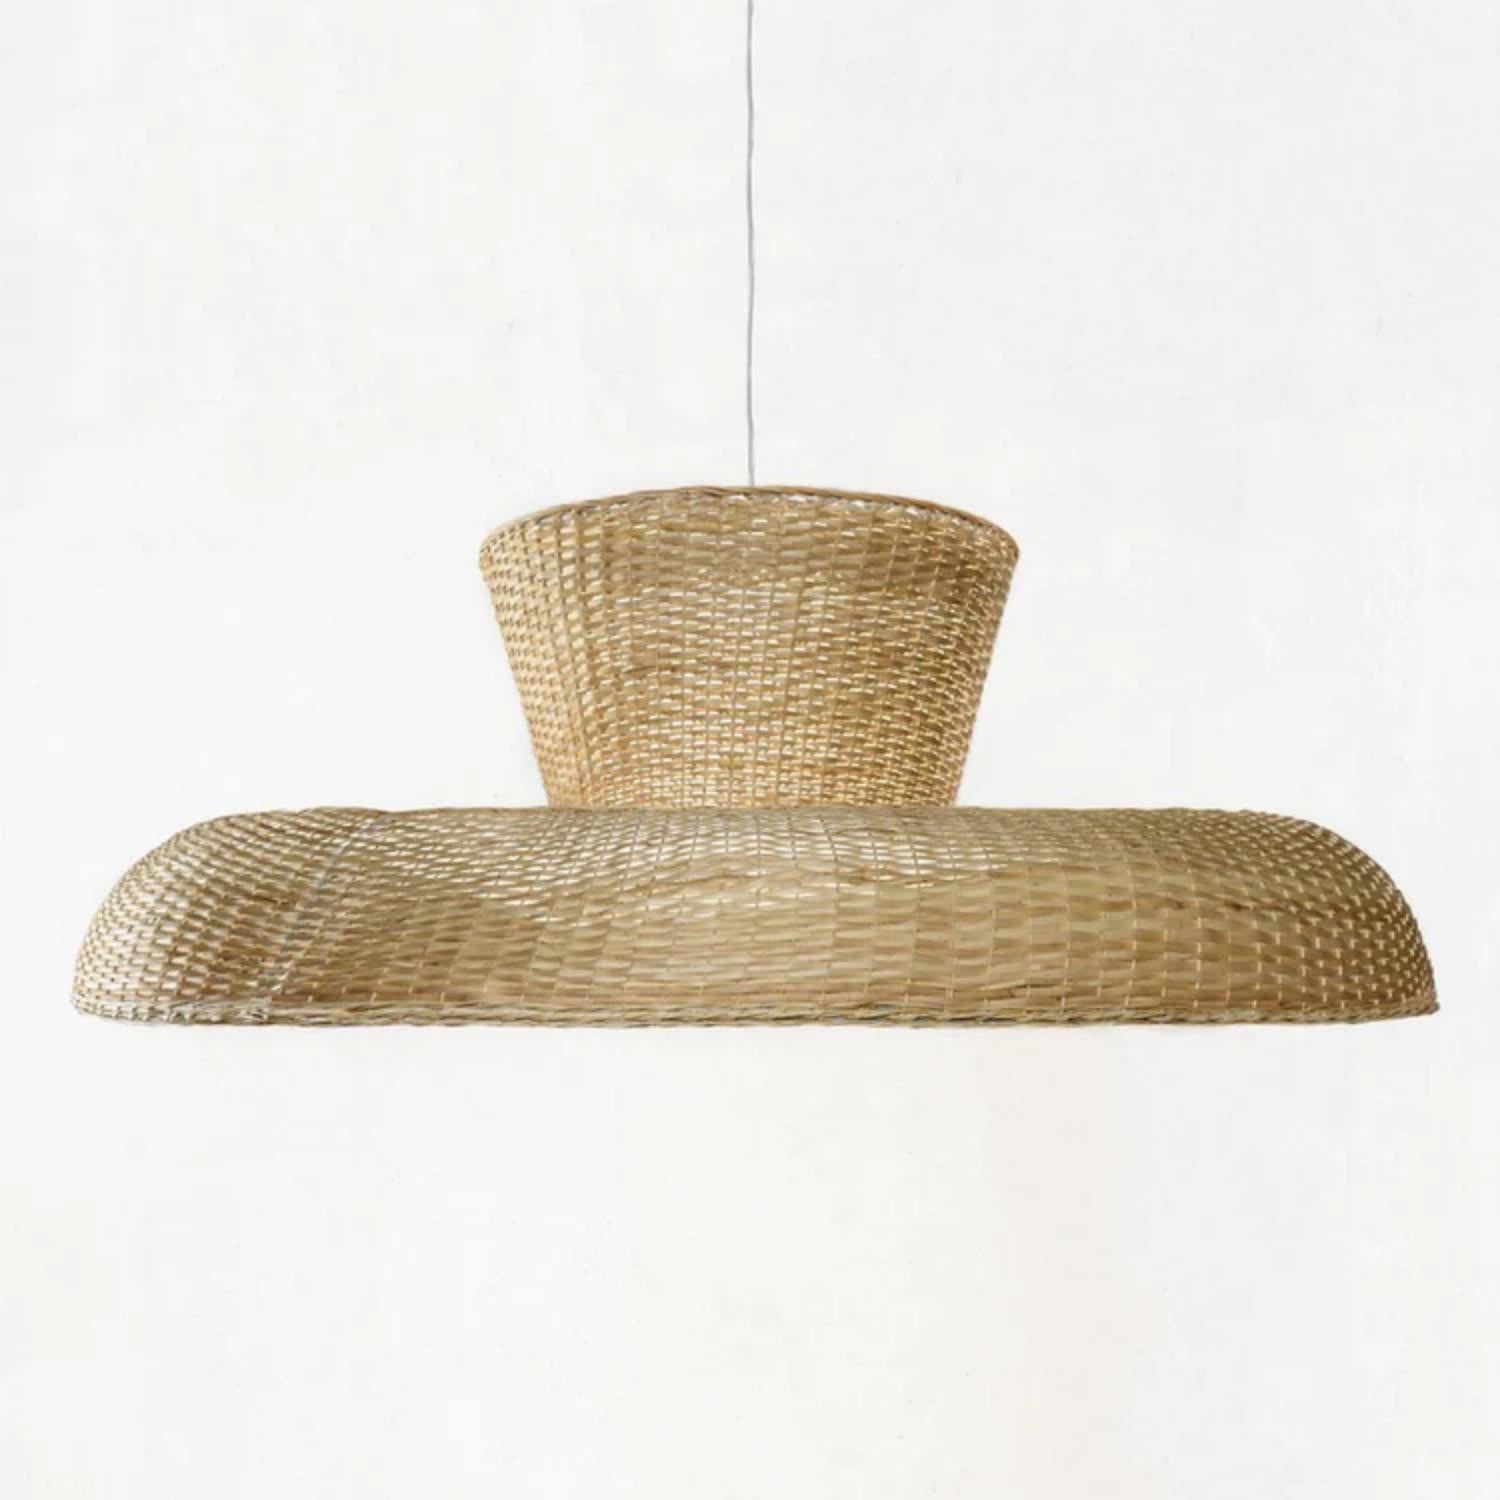 Large strikha pendant lamp by Faina
Design: Victoriya Yakusha
Material: Willow, steel frame
Dimensions: D 150 x H 52.5 cm


Cable length - 3m
Cable type - 2x0.5
Steel wire rope with a clamp x3
E27 bulb x 1
Ceiling fixture x 1, 3x40mm dowel